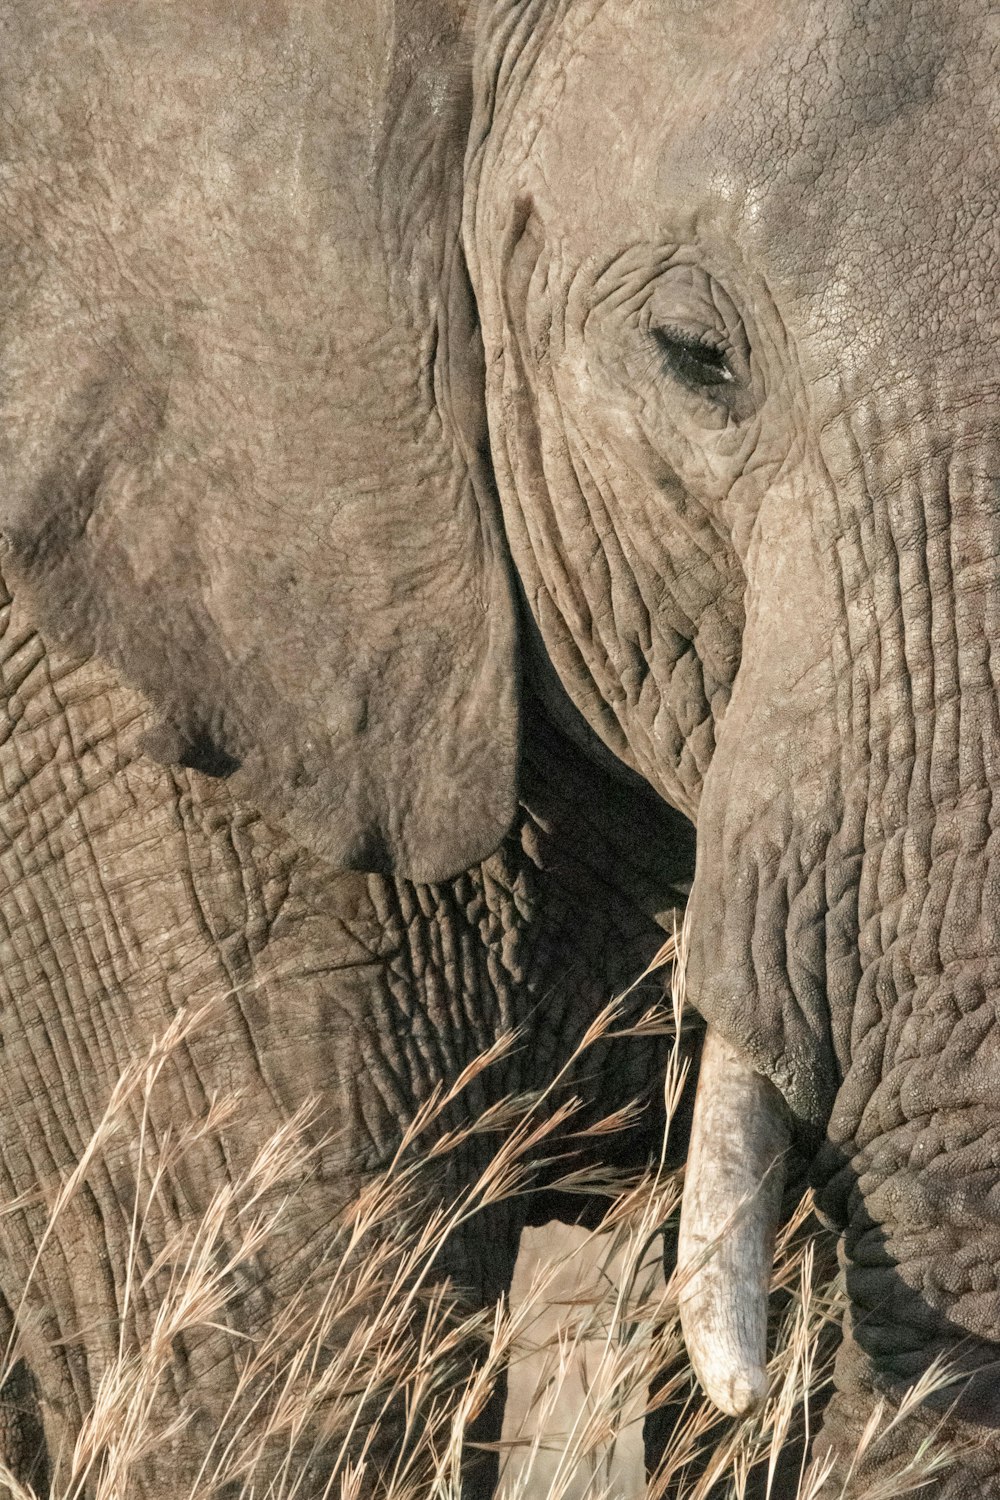 close-up photography of elephant's face